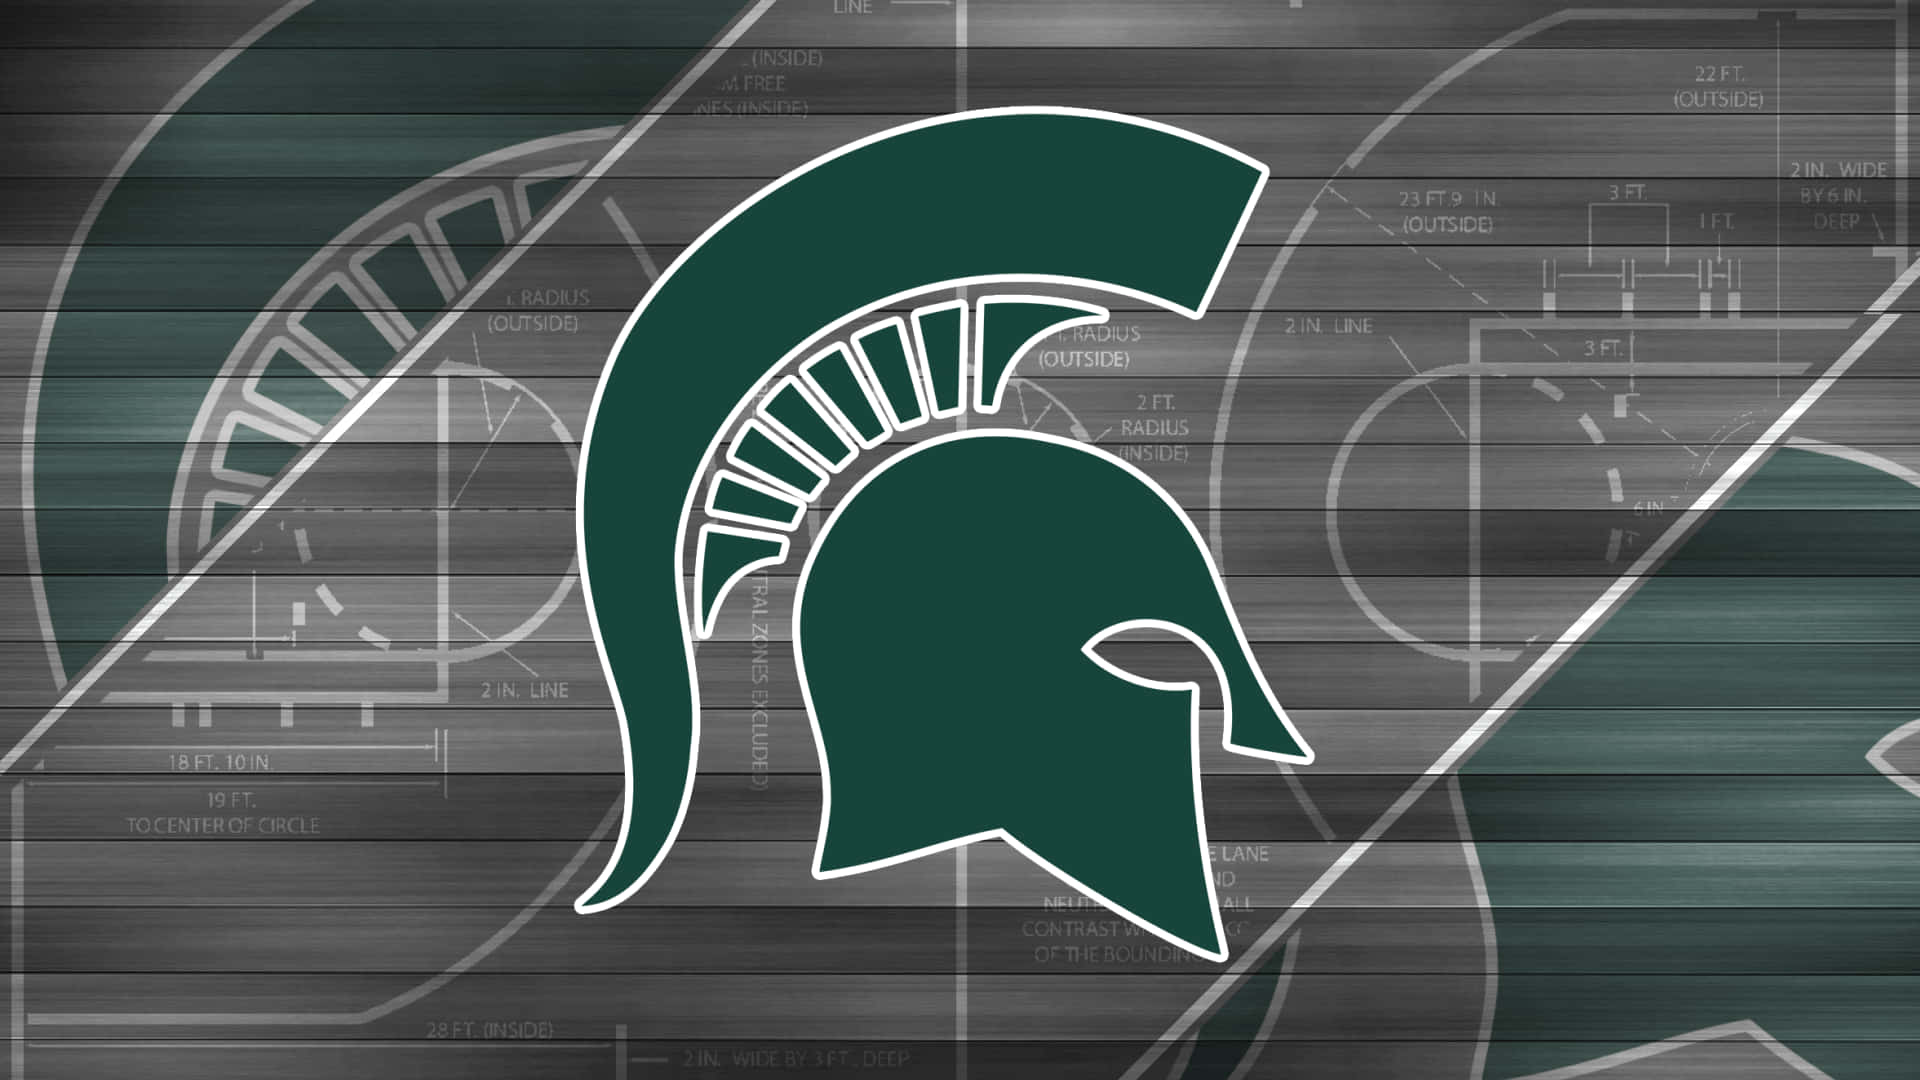 All In For The Michigan State Spartans Wallpaper